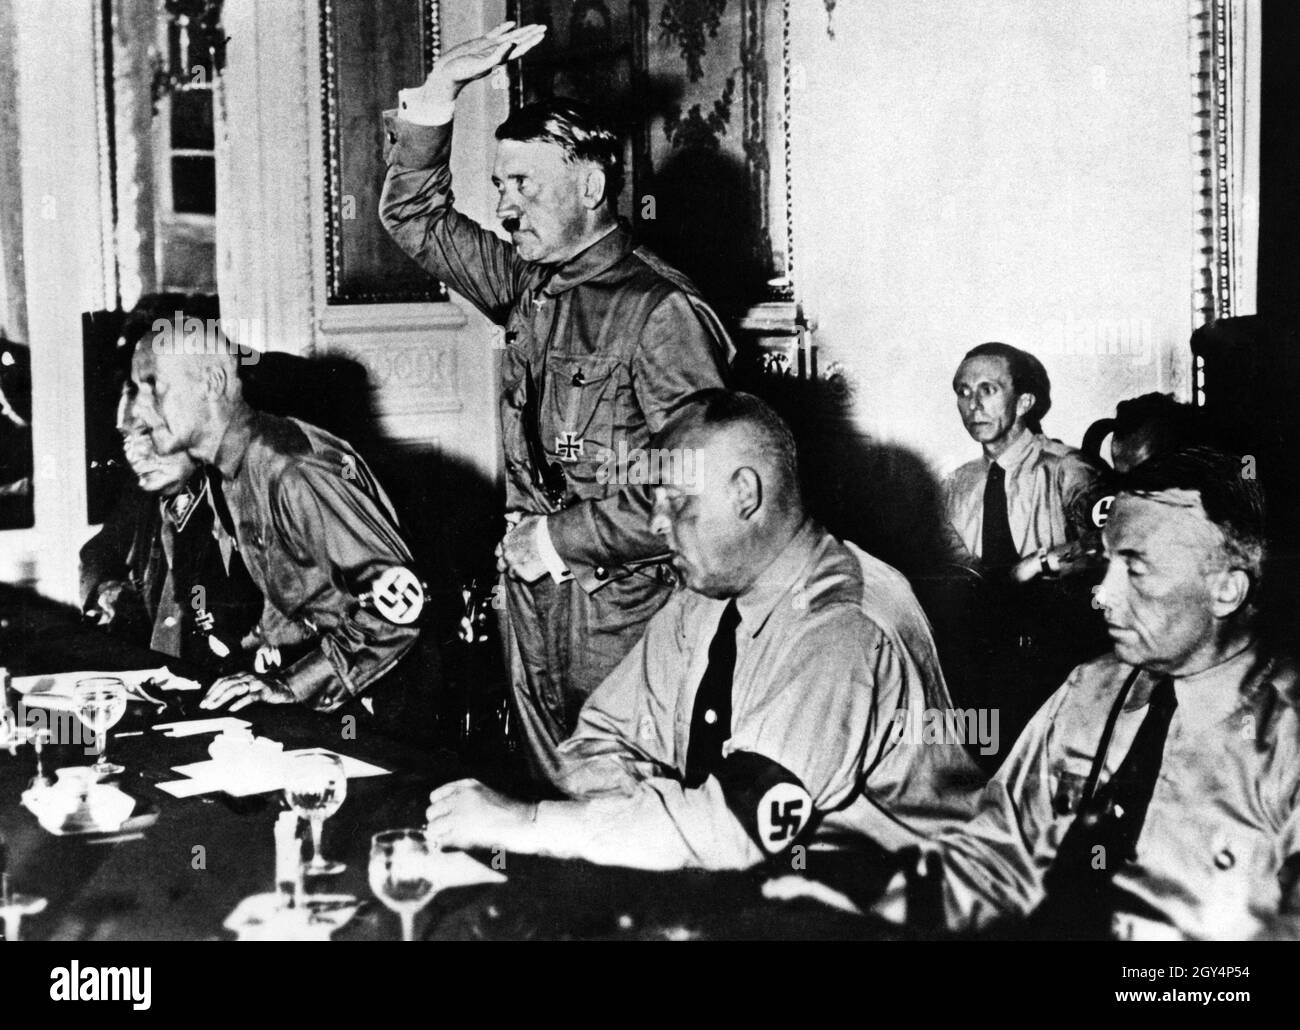 At a meeting of the NSDAP after it had entered the Reichstag for the first time in the previous elections, in the presence of (from left) Hermann Göring, Wilhelm Frick, Adolf Hitler, Georg Strasser, Joseph Goebbels and Franz Stoehr. [automated translation] Stock Photo